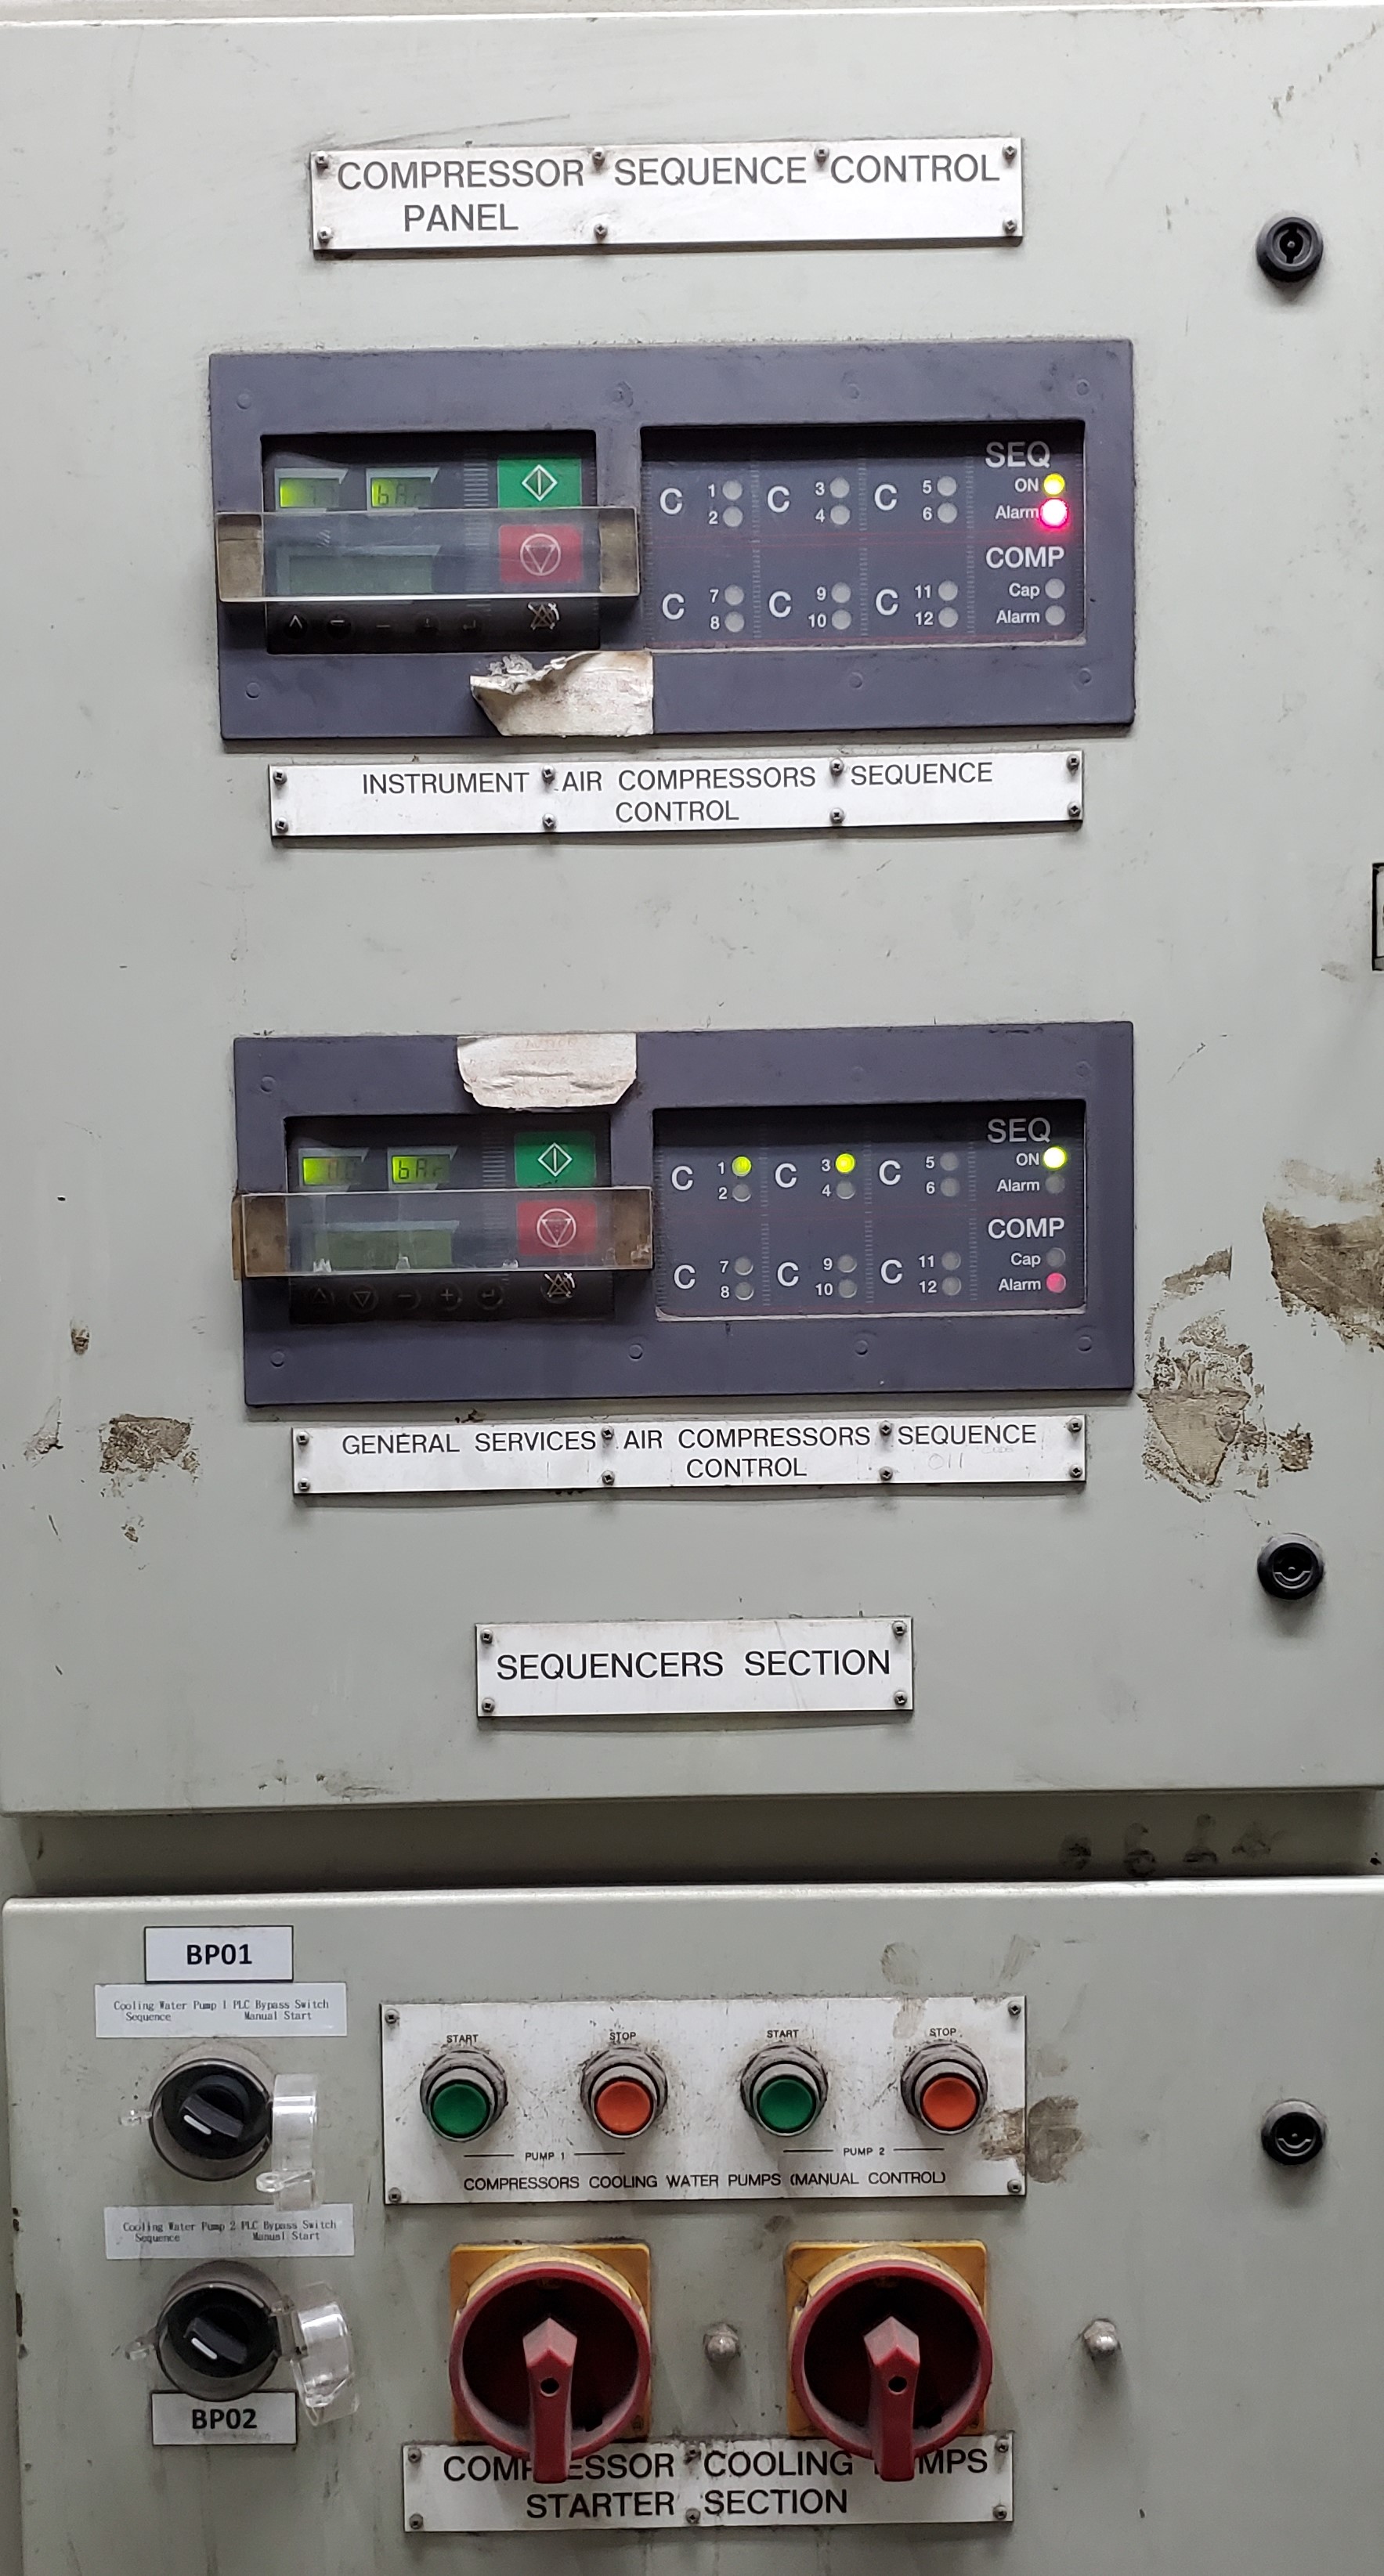 External View of CPB Compressor Sequence Control Panel Before Works